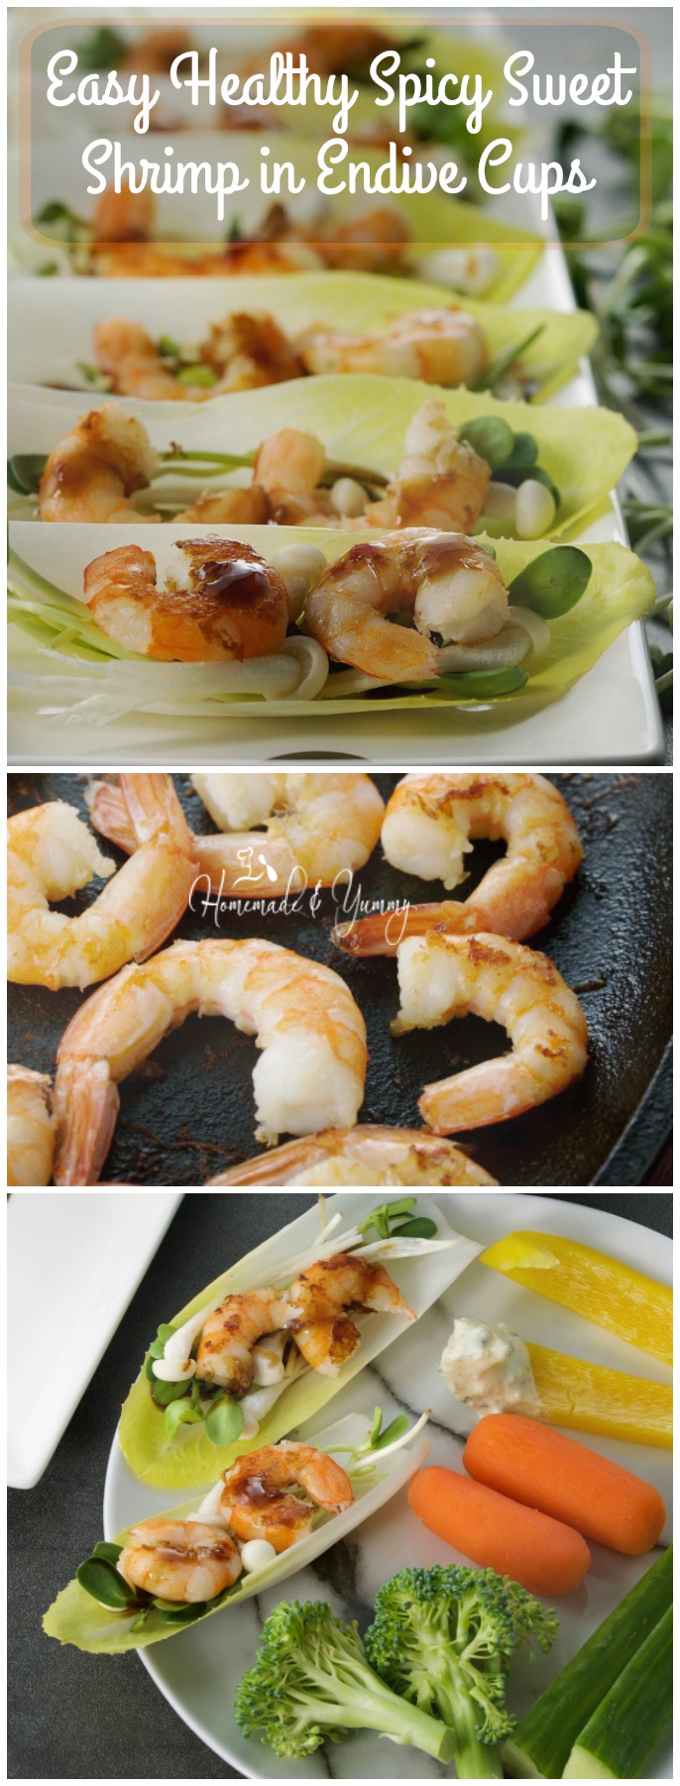 Easy Healthy Spicy Sweet Shrimp in Endive Cups long pin image.